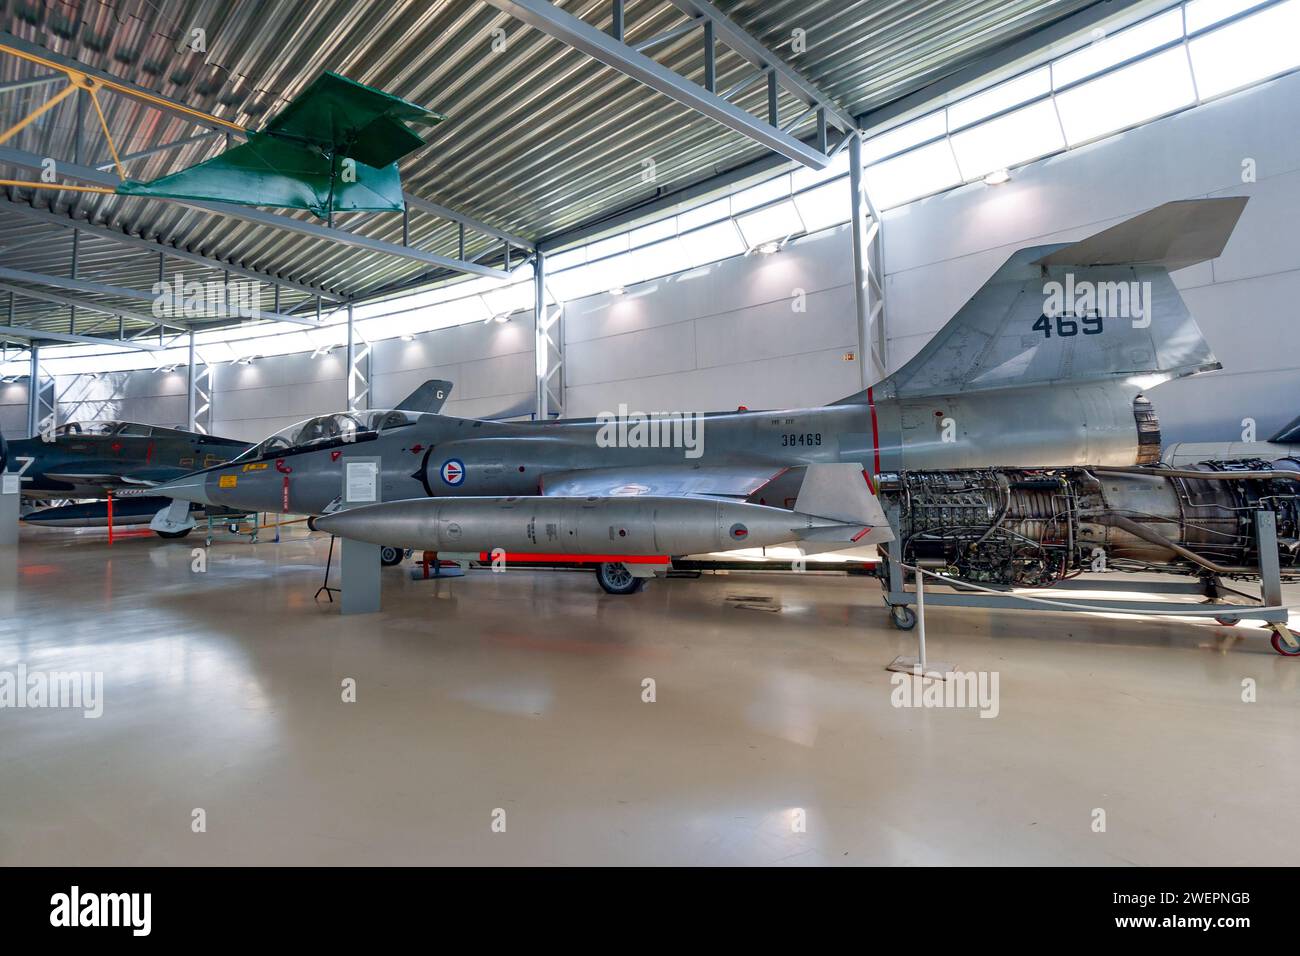 Lockheed F-104 Starfighter fighter jet from the Royal Norwegian Air Force on display in the Norwegian Armed Forces Museum at Oslo-Gardermoen airport. Stock Photo